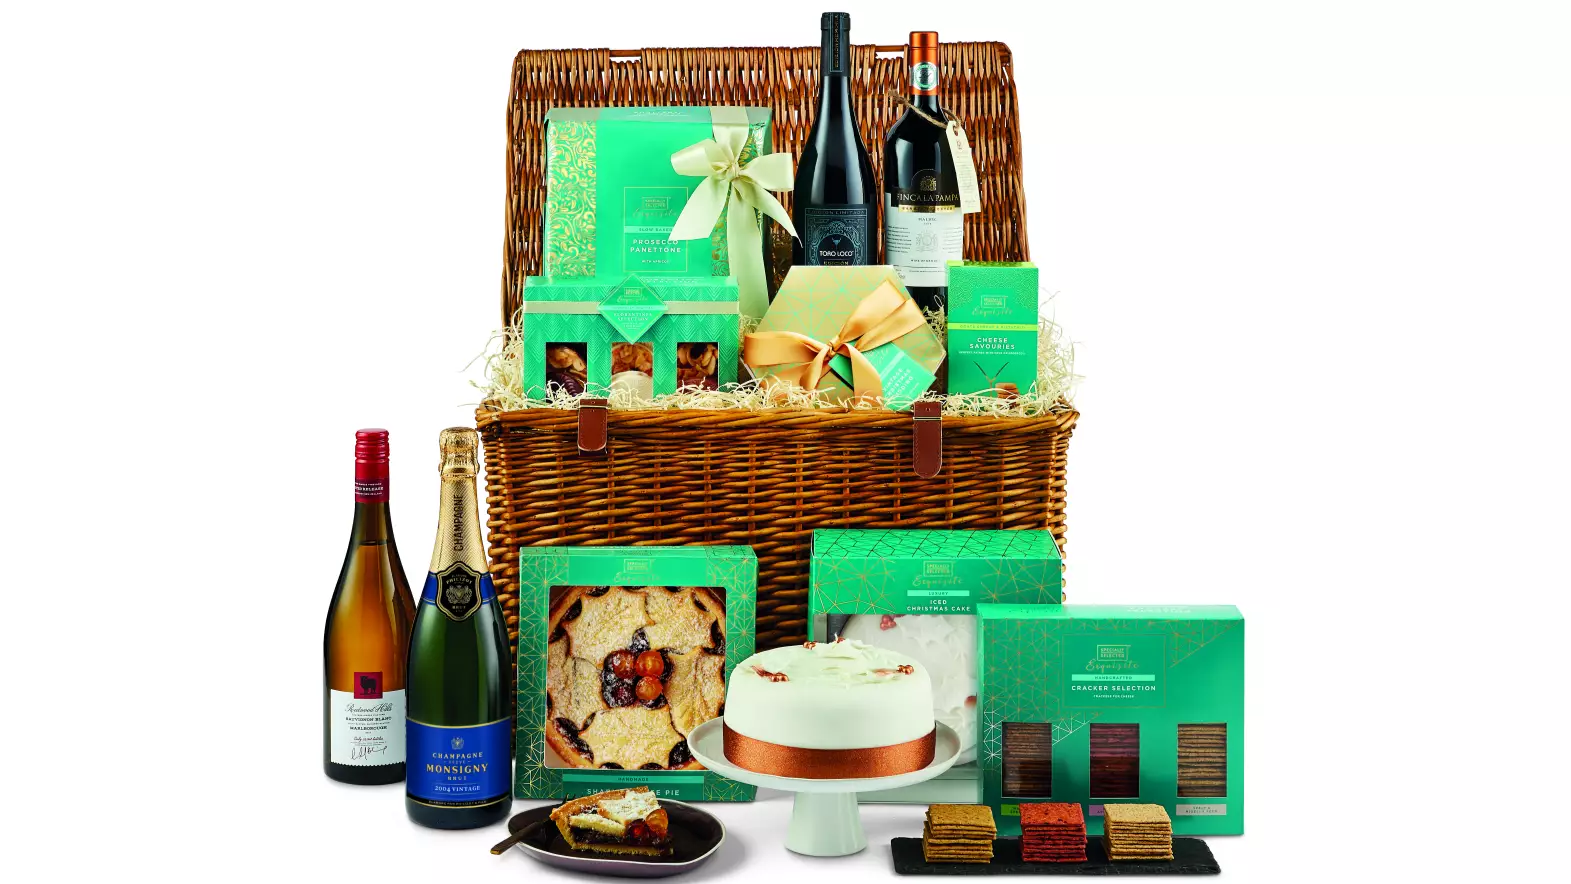 This £99.99 Aldi Hamper Is What Christmas Dreams Are Made Of